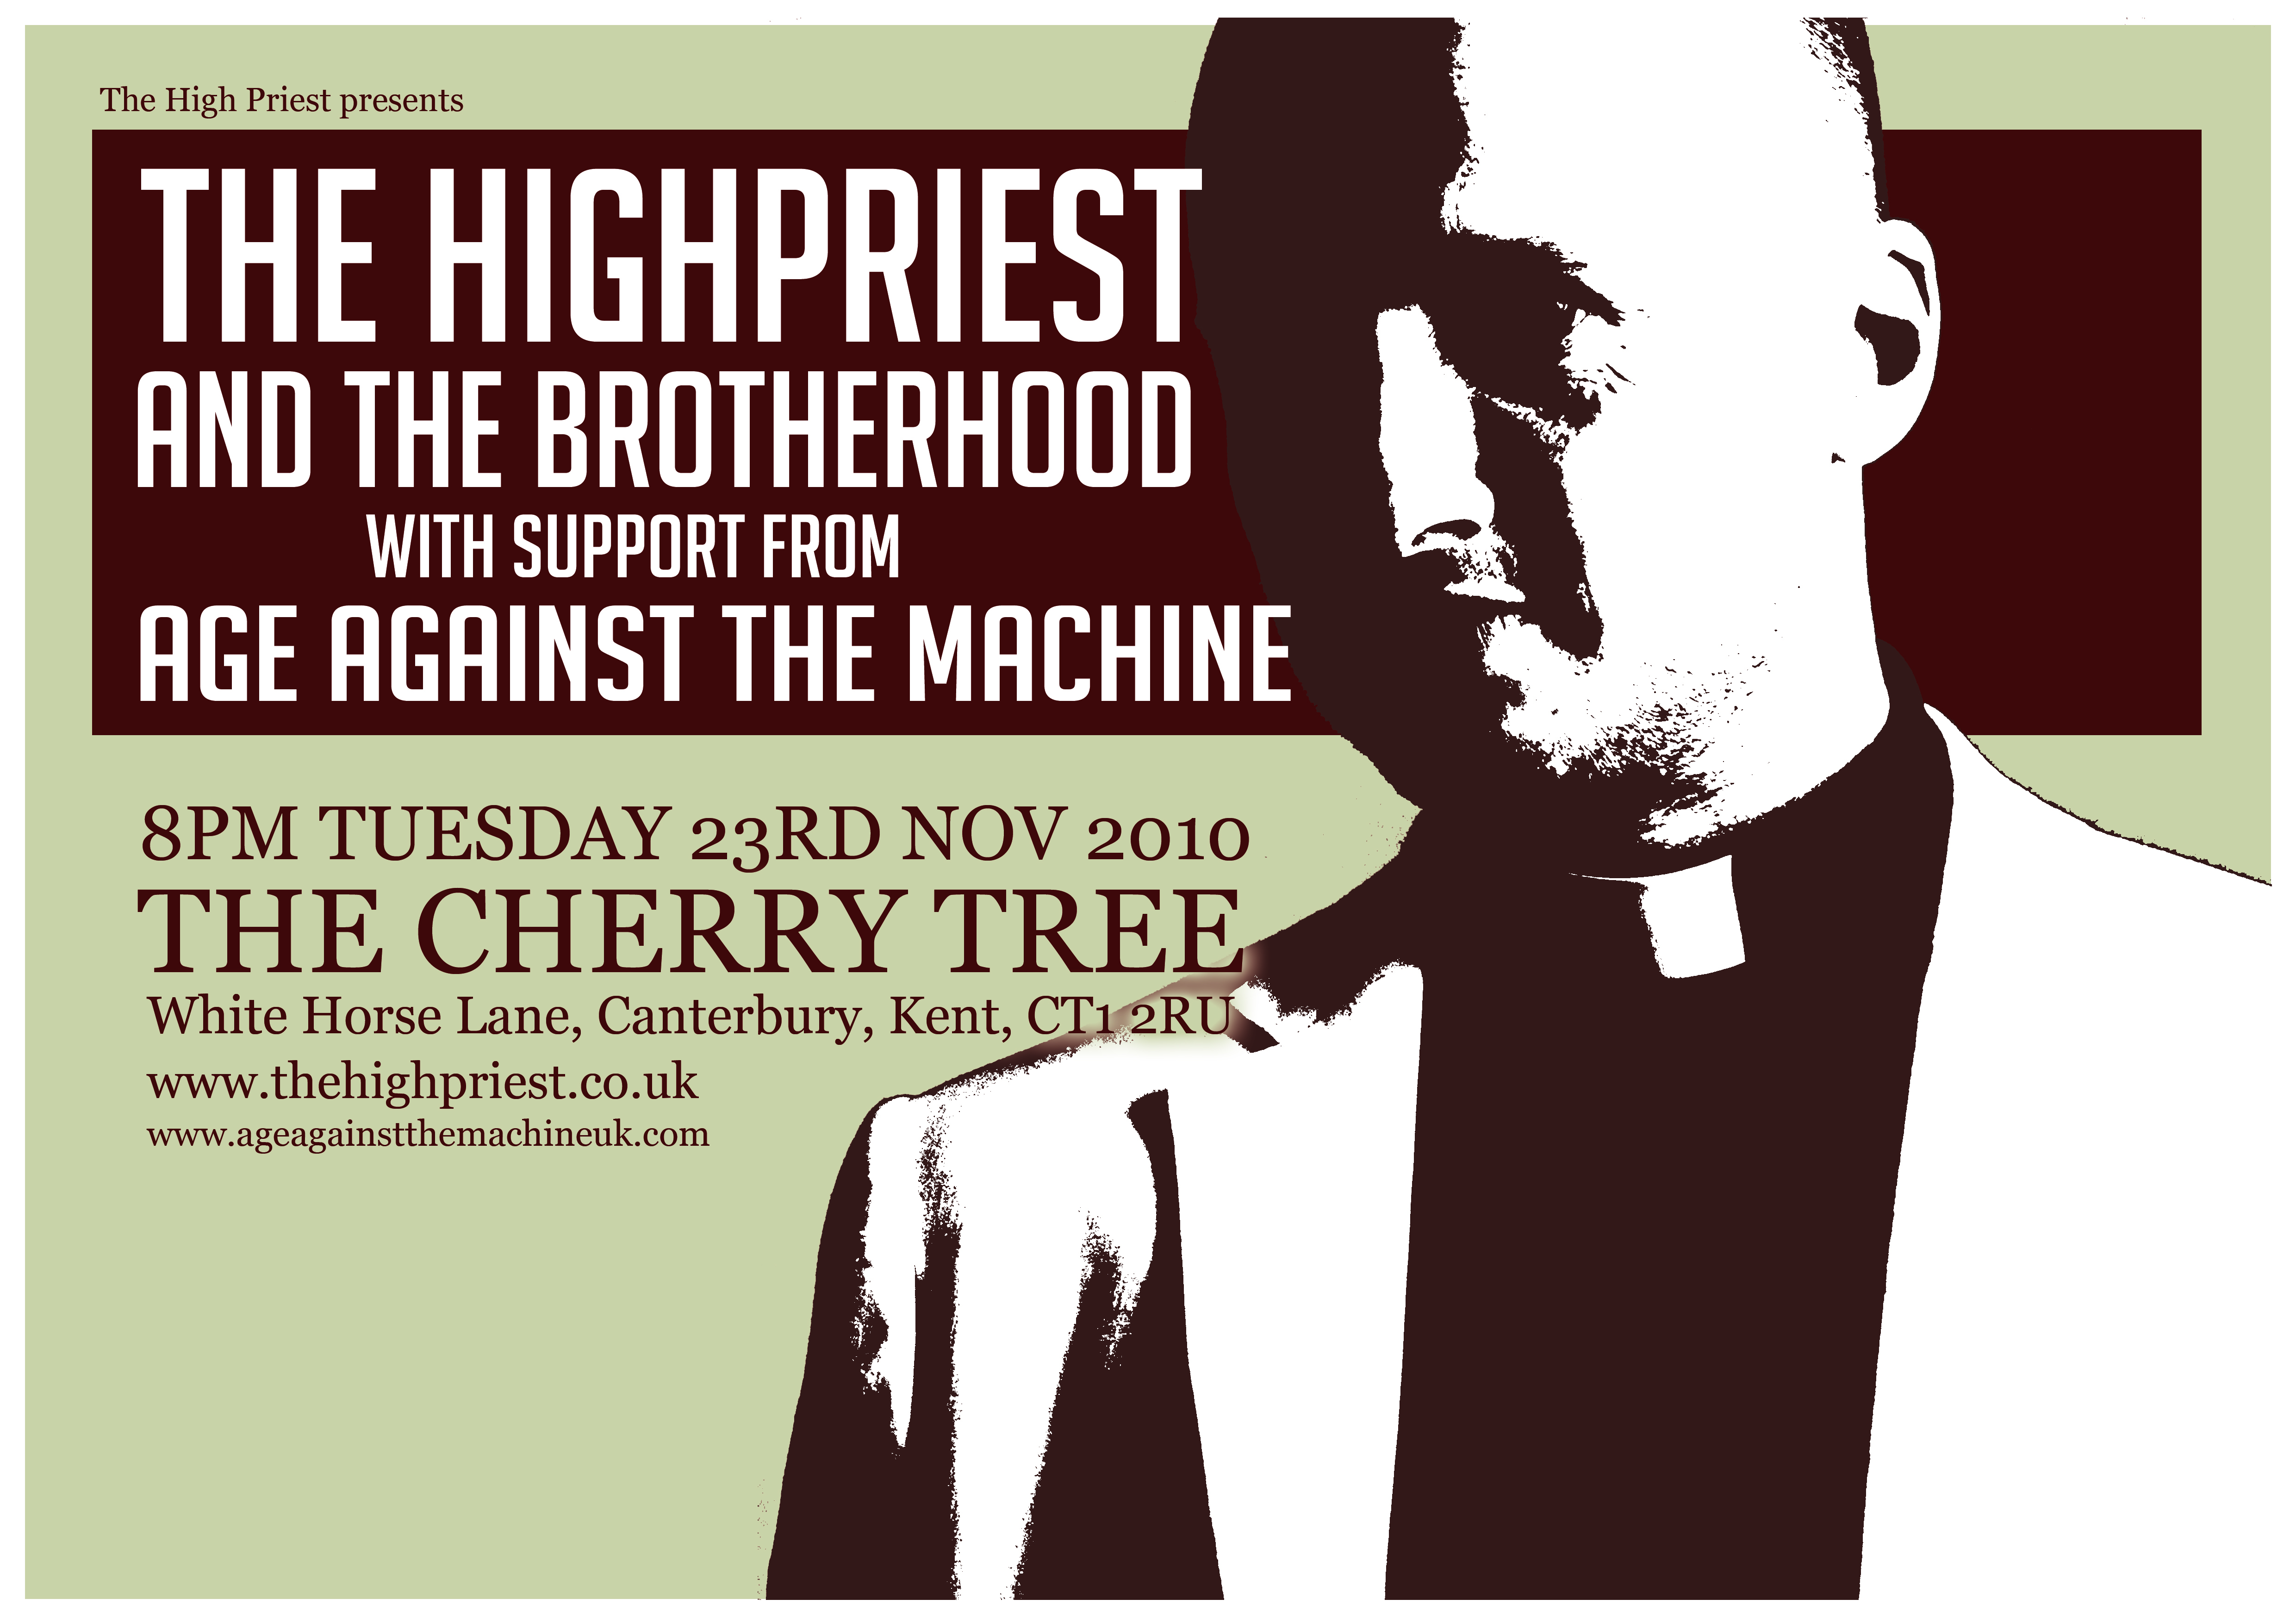 The High Priest comedy gig show poster